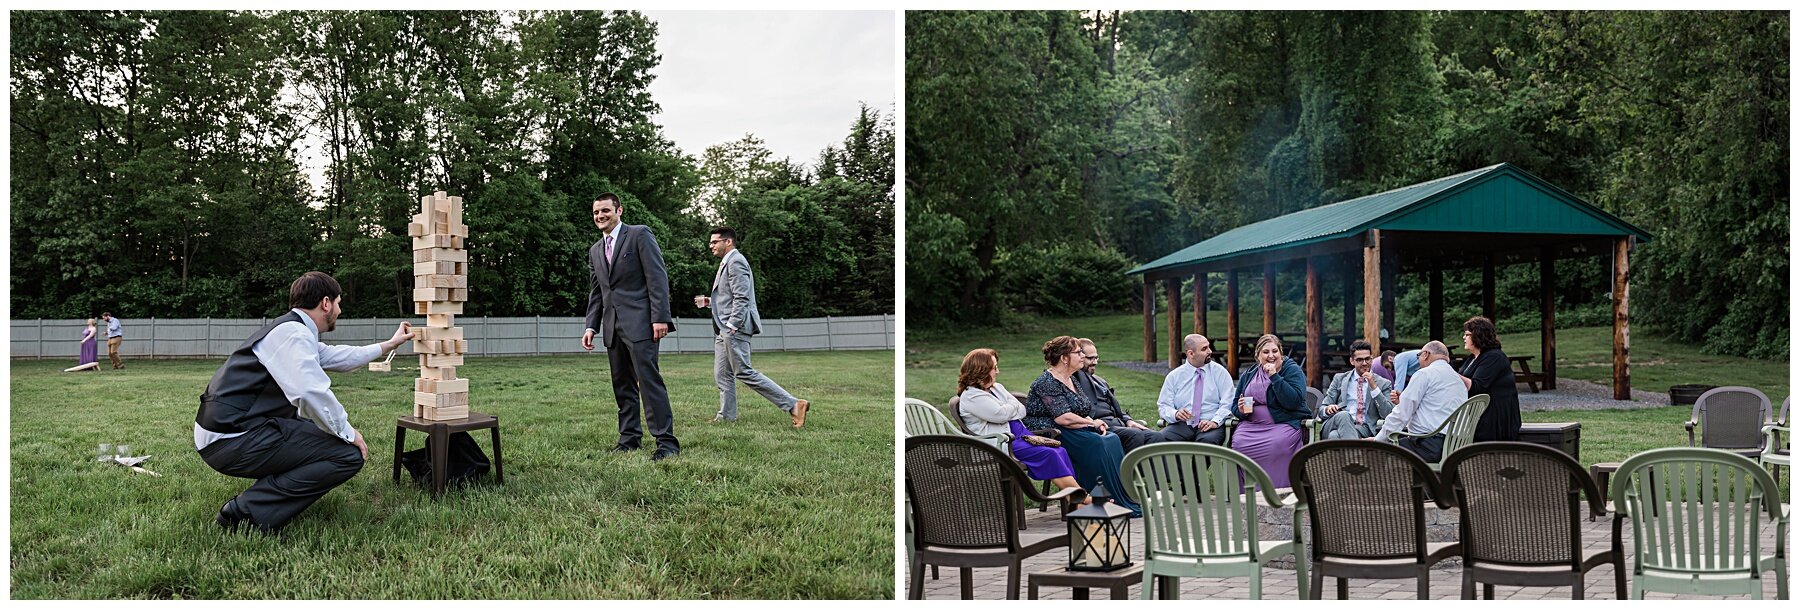 yard games and fire pit at wedding reception